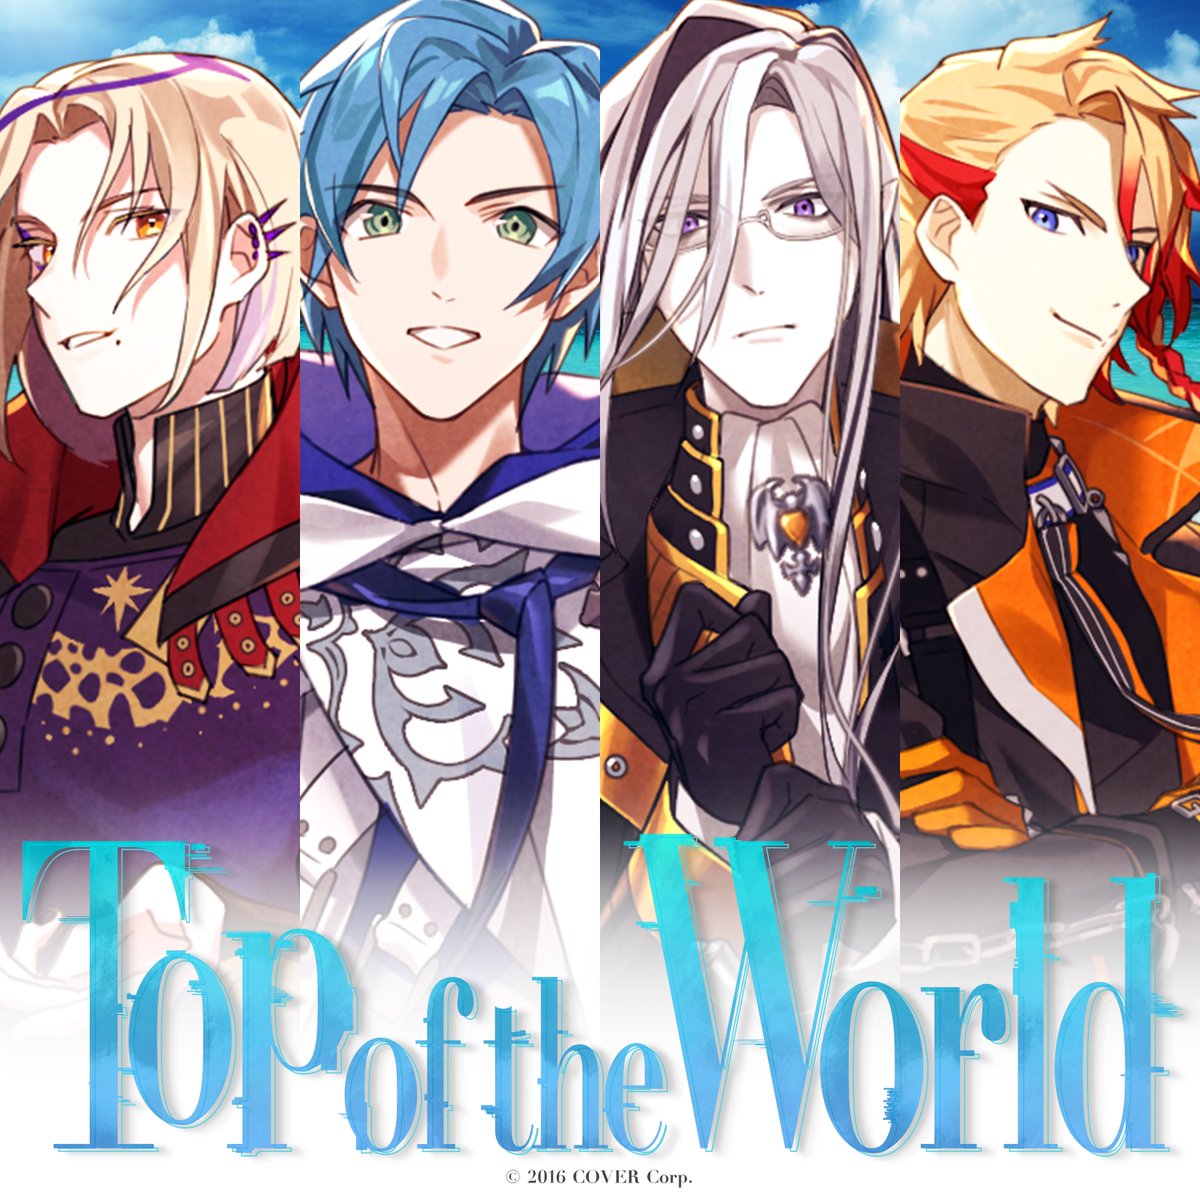 The 1st #holoTEMPUS original song “Top of the World” has been released! Check it out! 🧭 MV: youtube.com/watch?v=CNxHJN… All Available Platforms: cover.lnk.to/totw @regisaltare @magnidezmond @axelsyrios @noirvesper_en